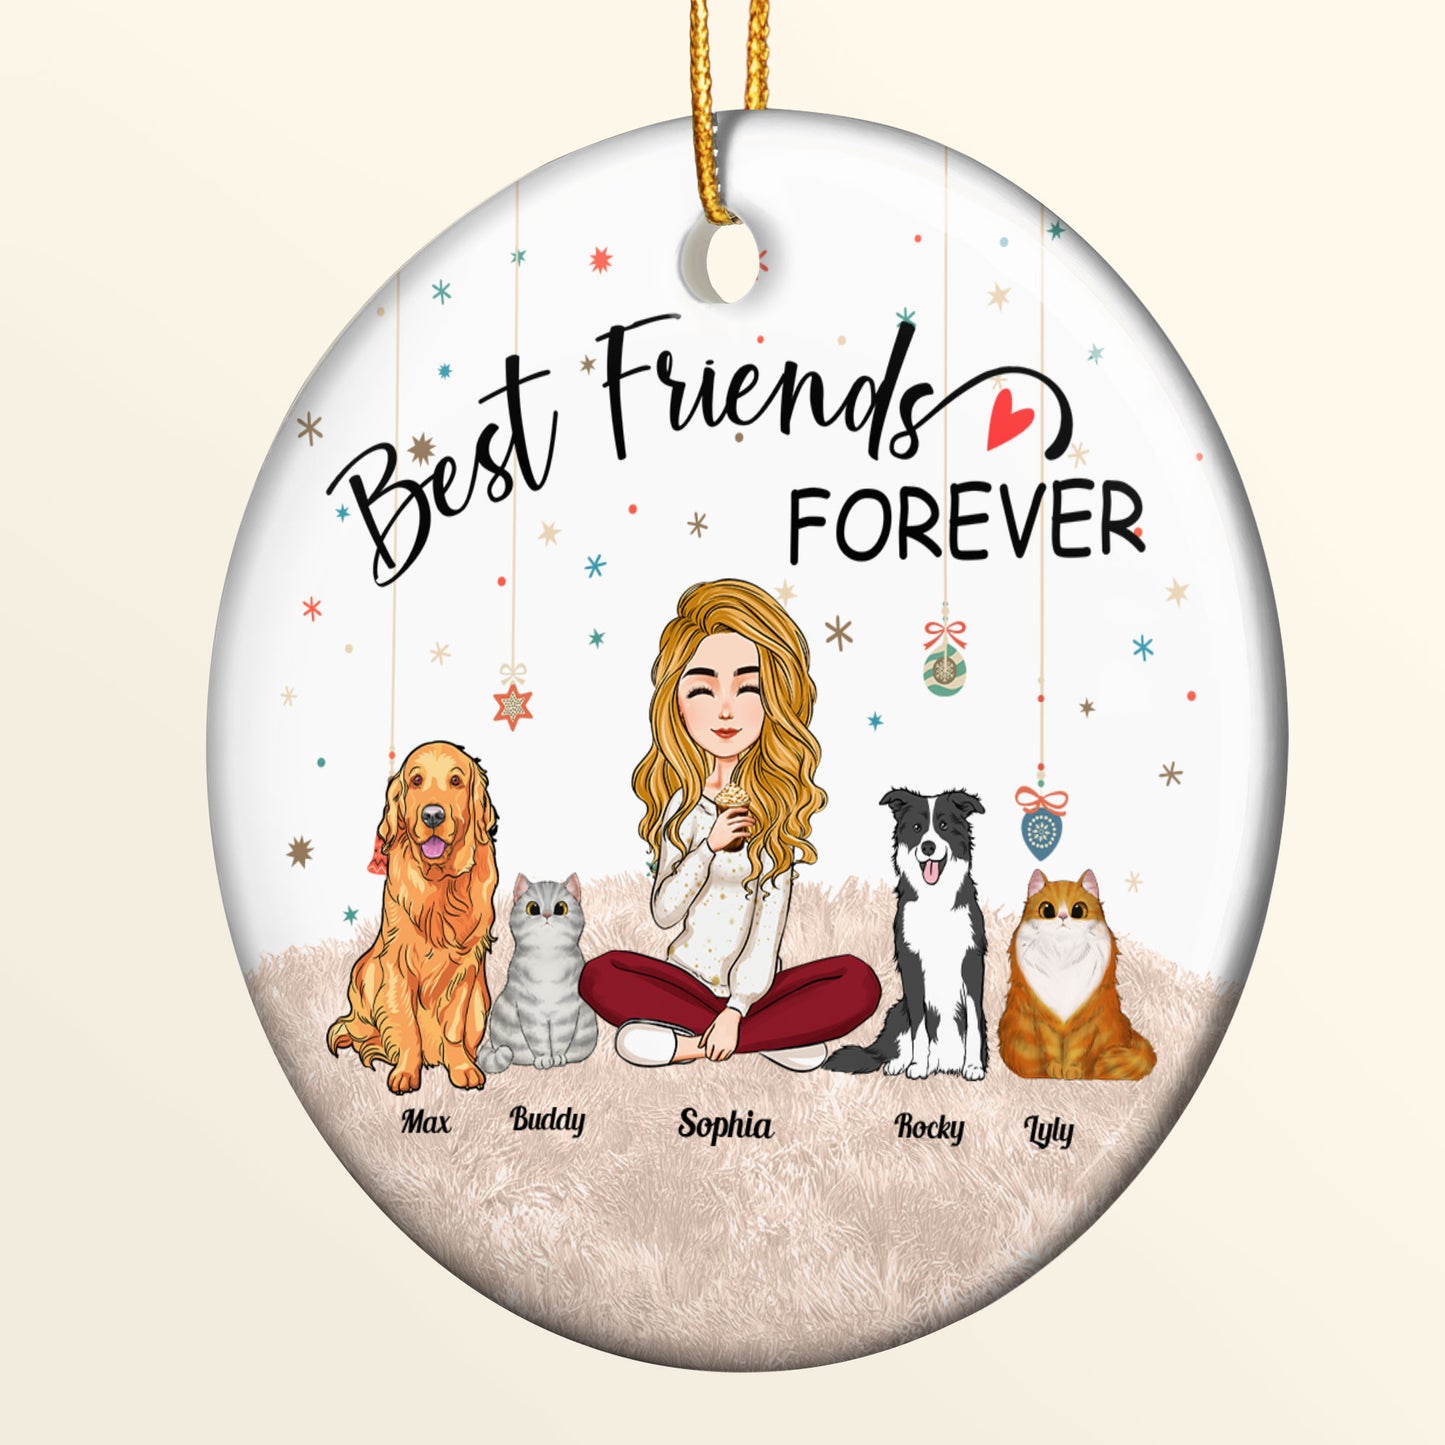 Best Friends Forever - Personalized Ceramic Ornament